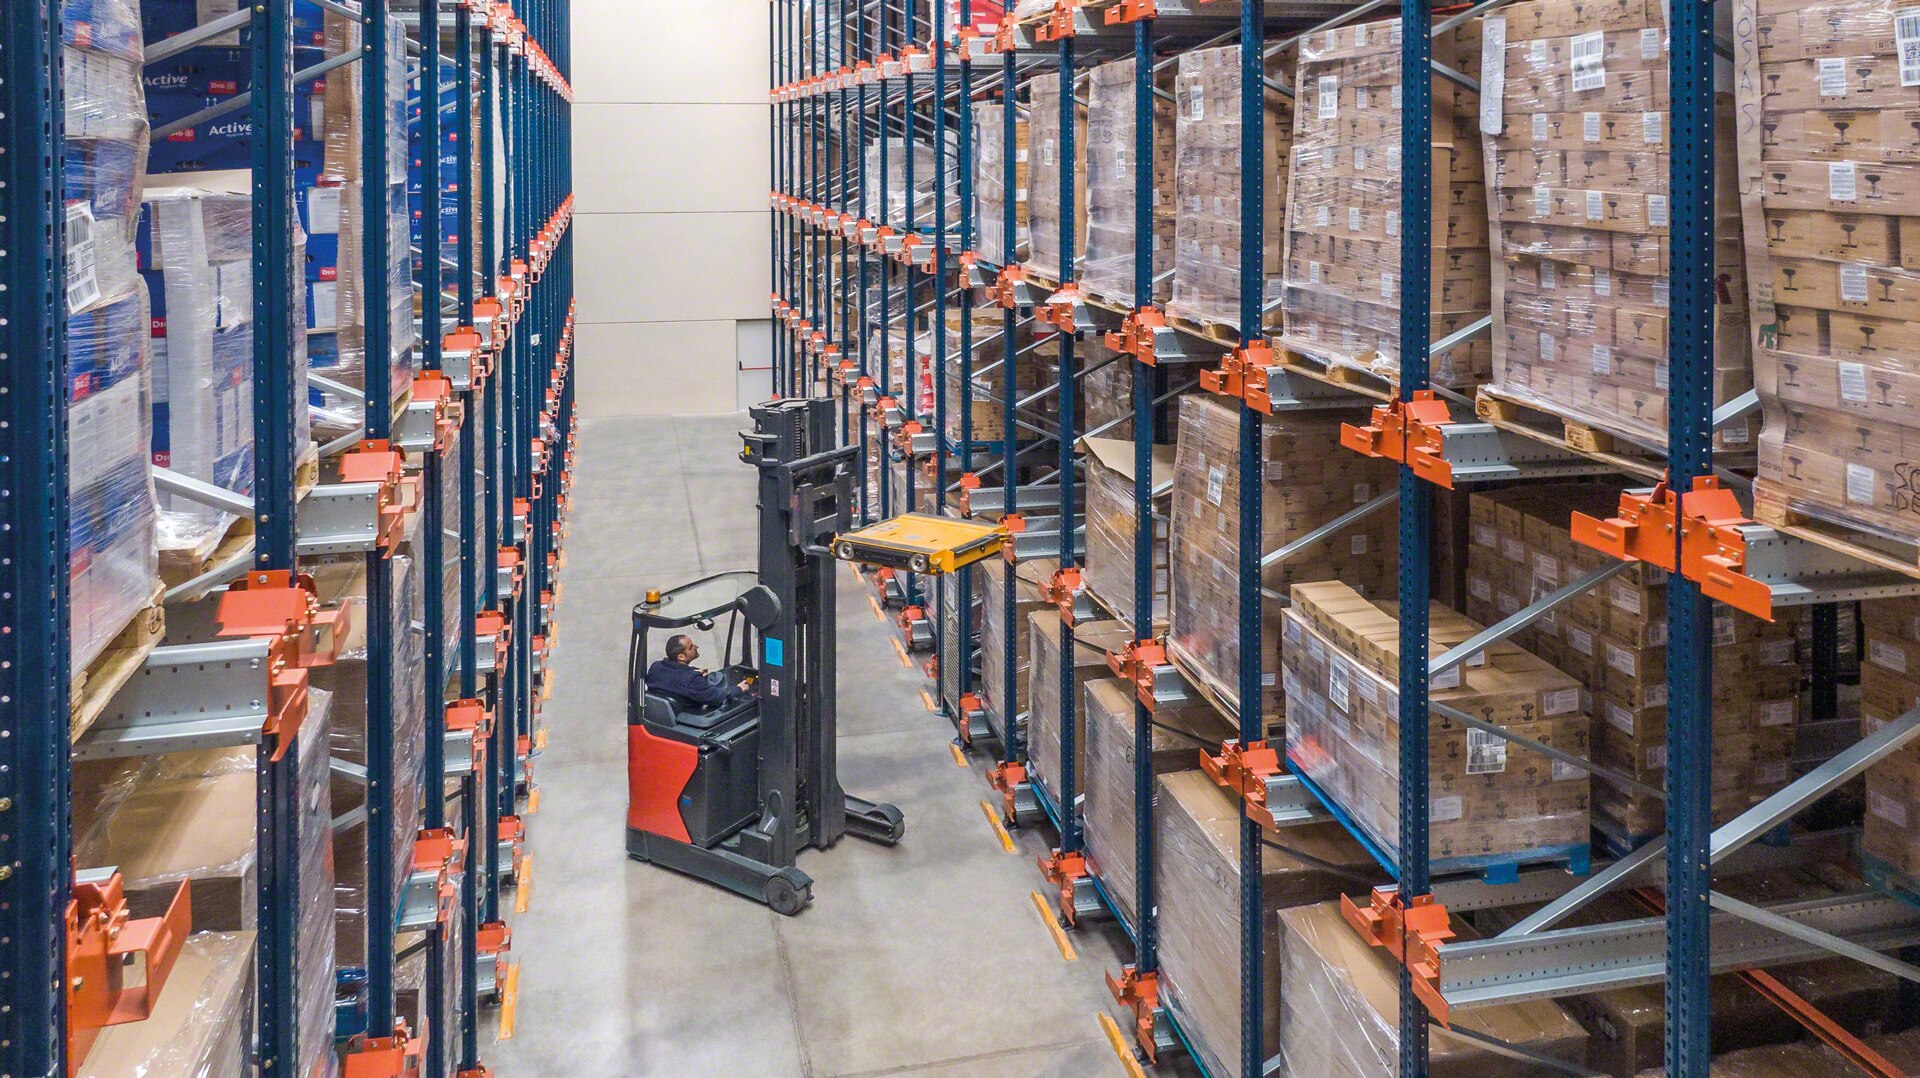 Forklift trucks place the shuttle in the storage channel to store or extract the goods in high-density systems